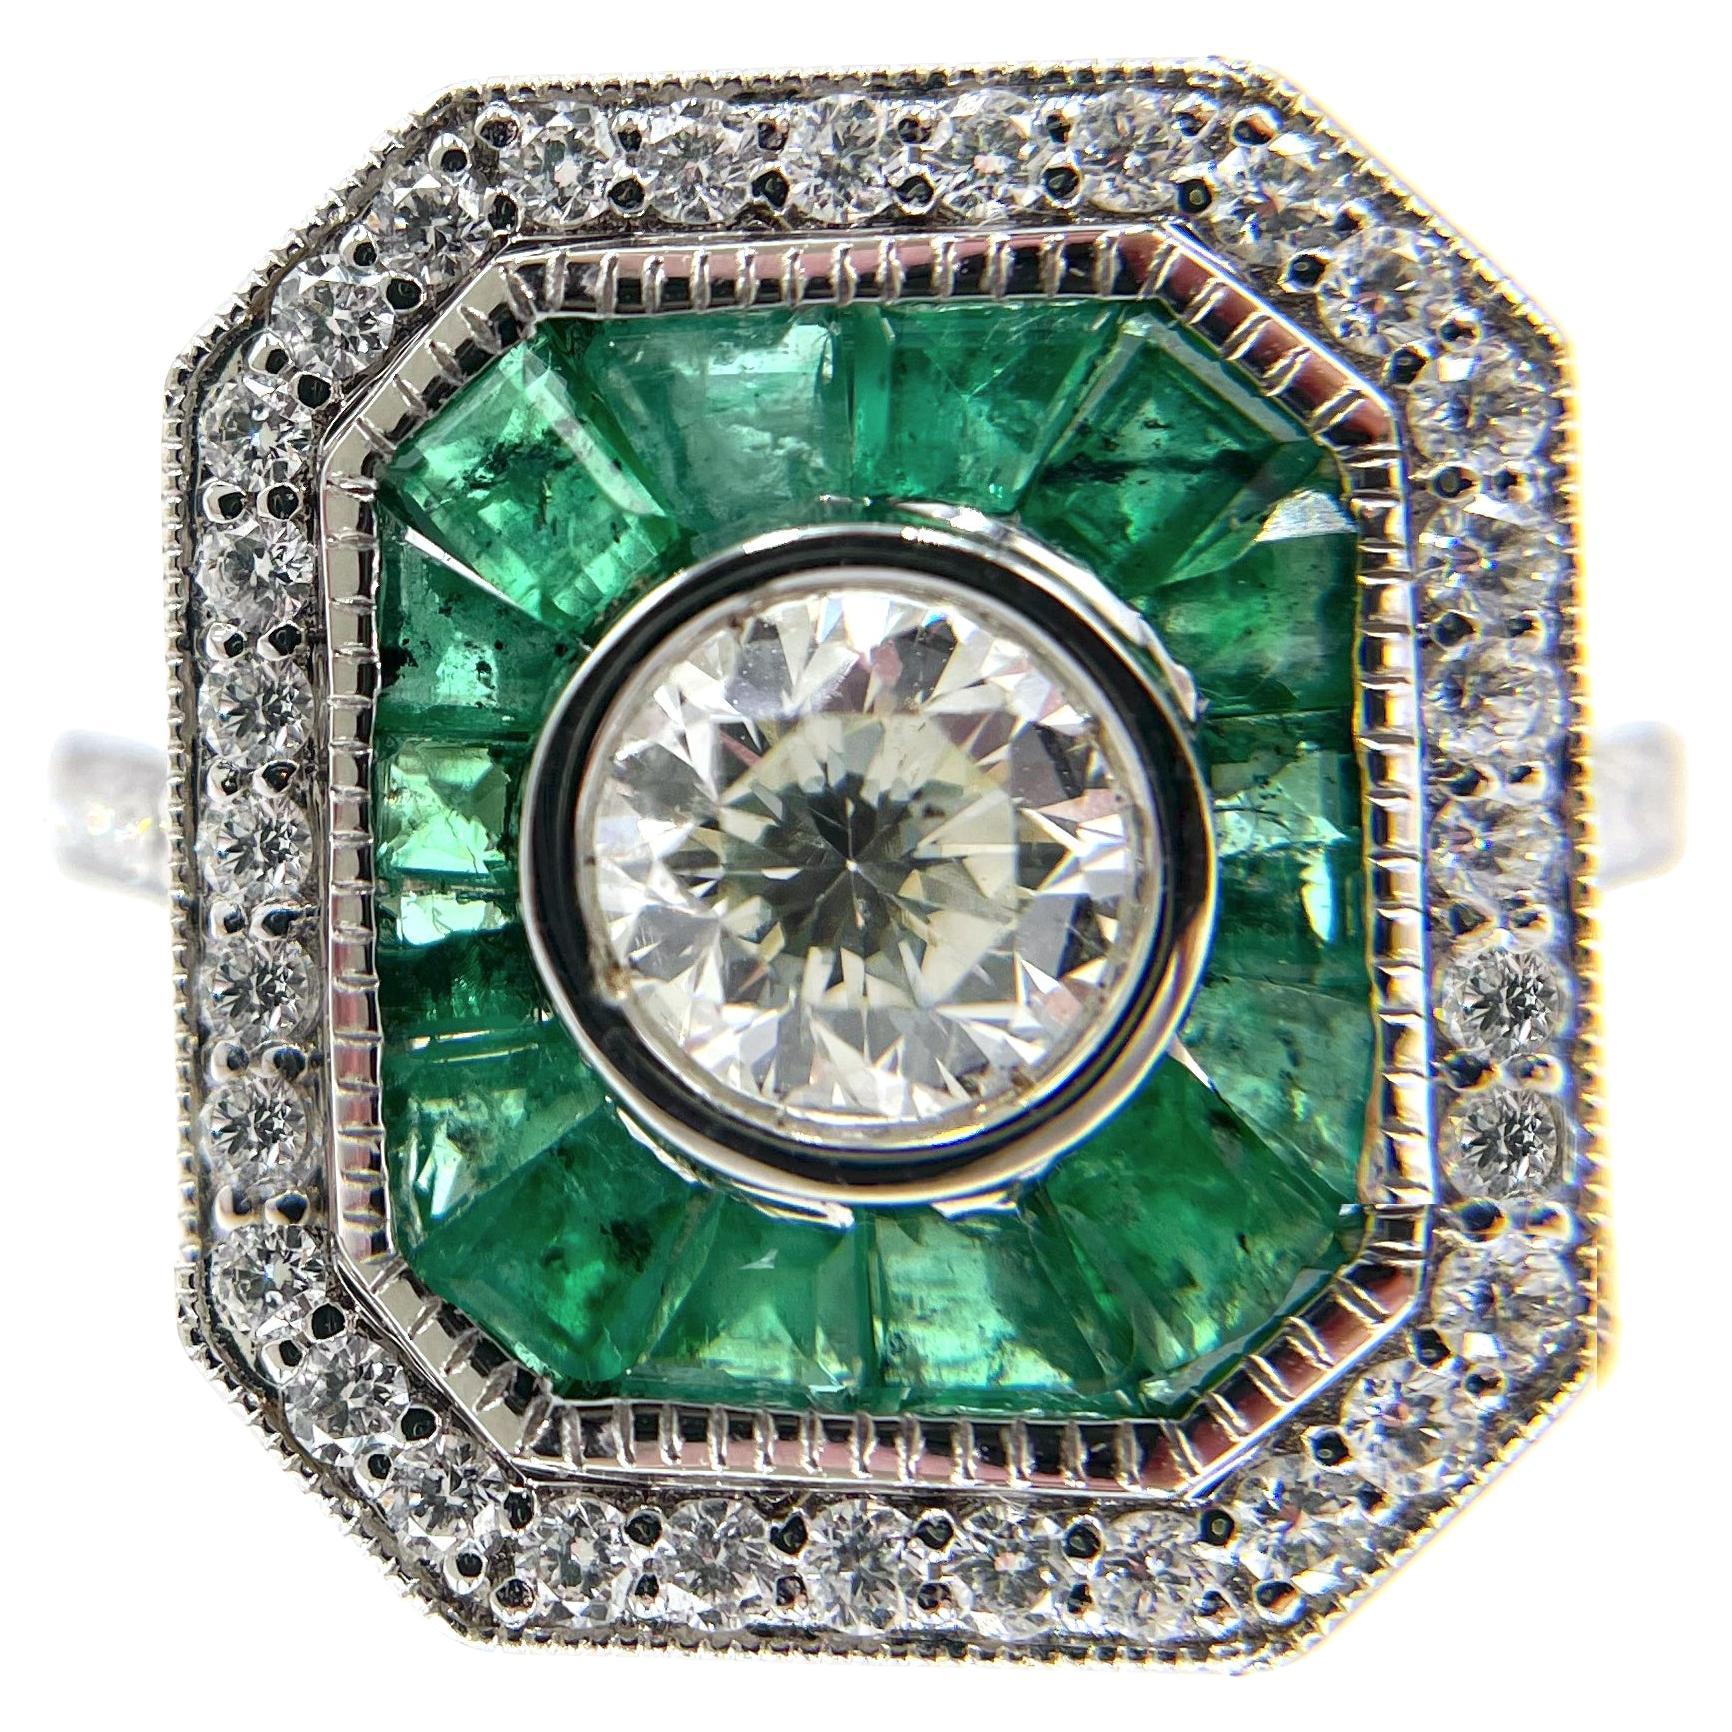 18K white gold Art Deco inspired ring furnished with baguette cut emeralds weighing 1.00 carats total and round faceted diamonds weighing 0.44 carats total.  In the center, one round old cut diamond weighing 0.62 carats (J color, SI2 clarity).

*